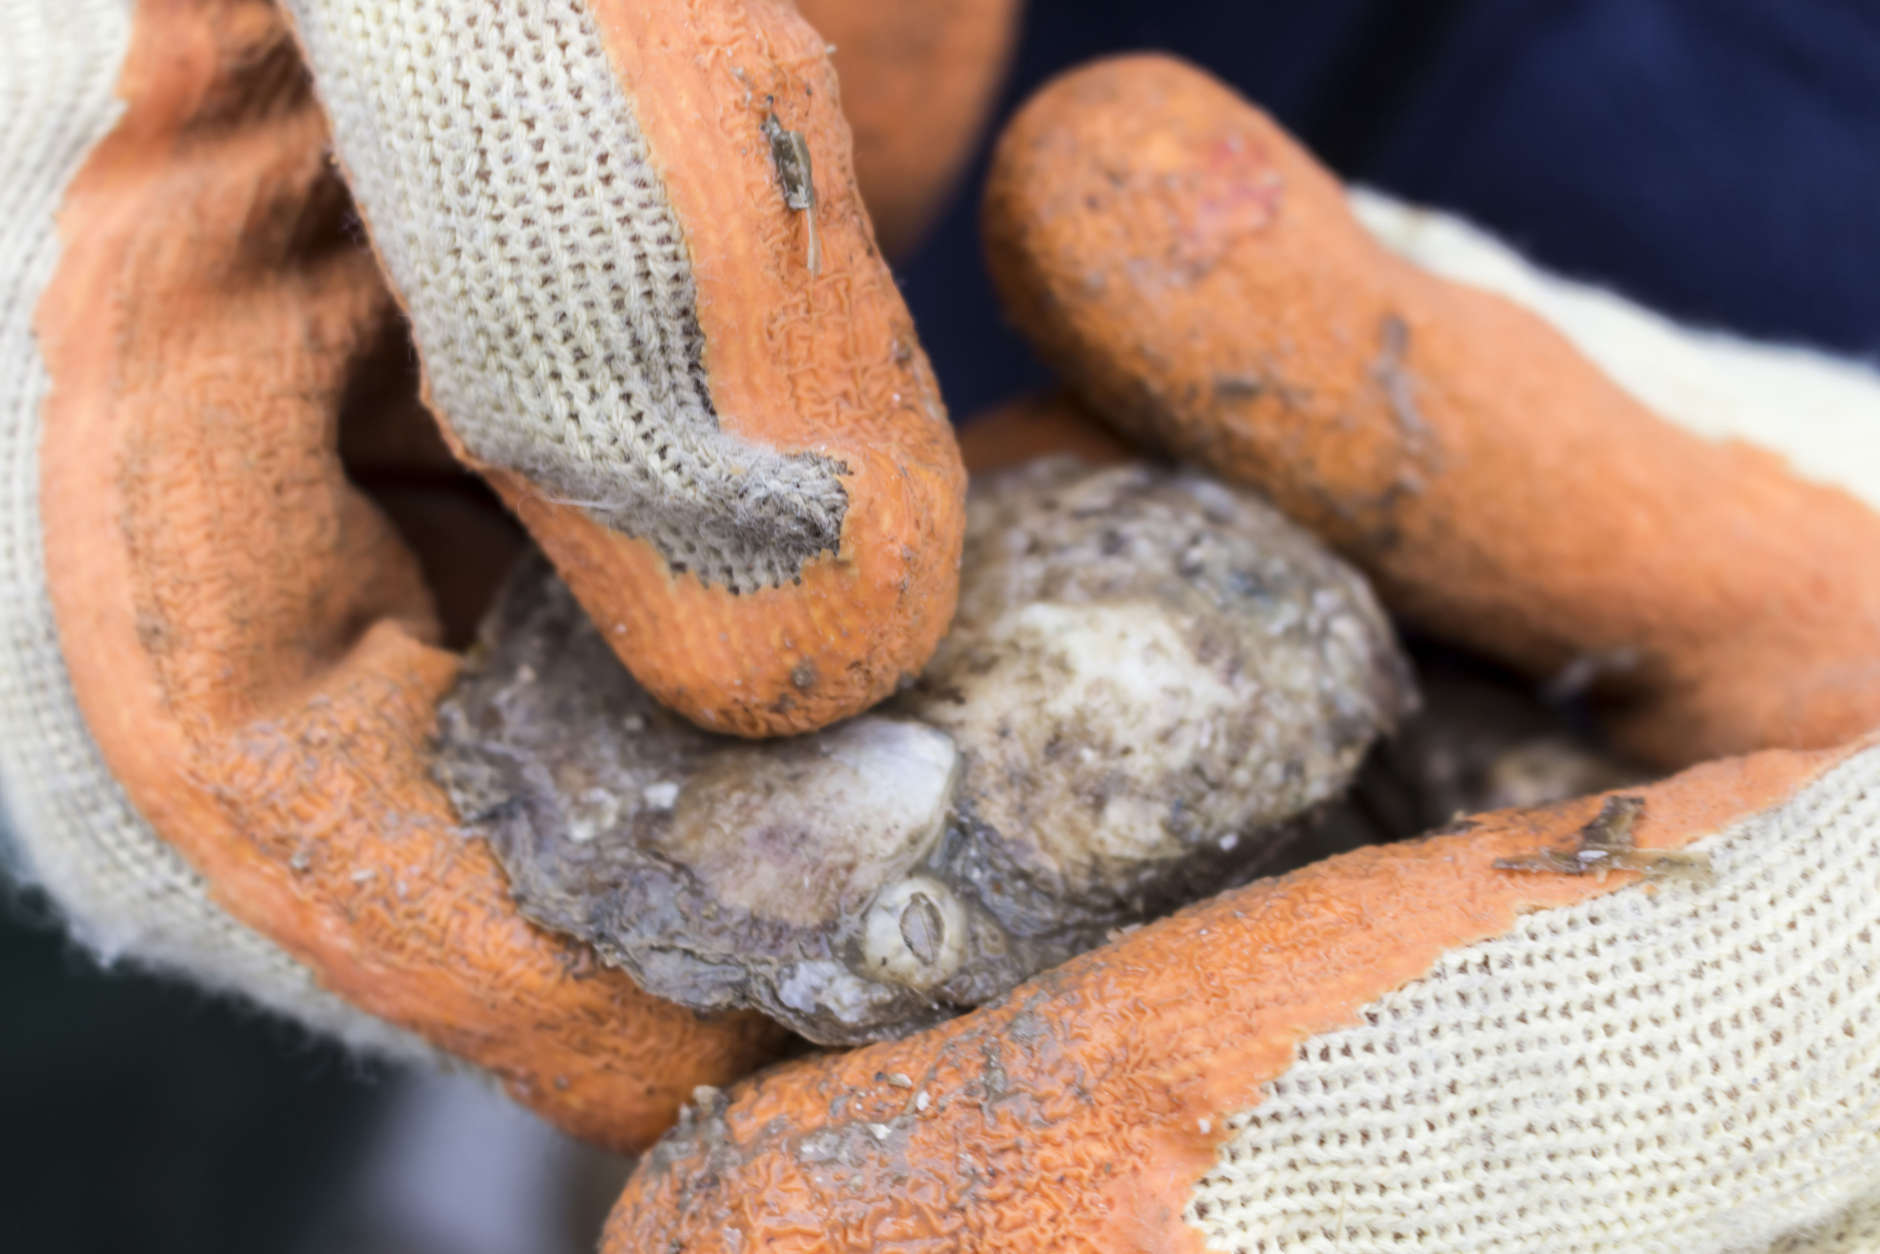 Shell Recycling Alliance driver Wayne Witzke points to an example Dec. 8, 2017, of where a baby oyster was formerly attached to shell in Annapolis, Md. Witzke and his colleagues recycle shell to bolster state and federally sponsored, large-scale oyster restoration in Chesapeake Bay tributaries. (Alex Mann/Capital News Service)